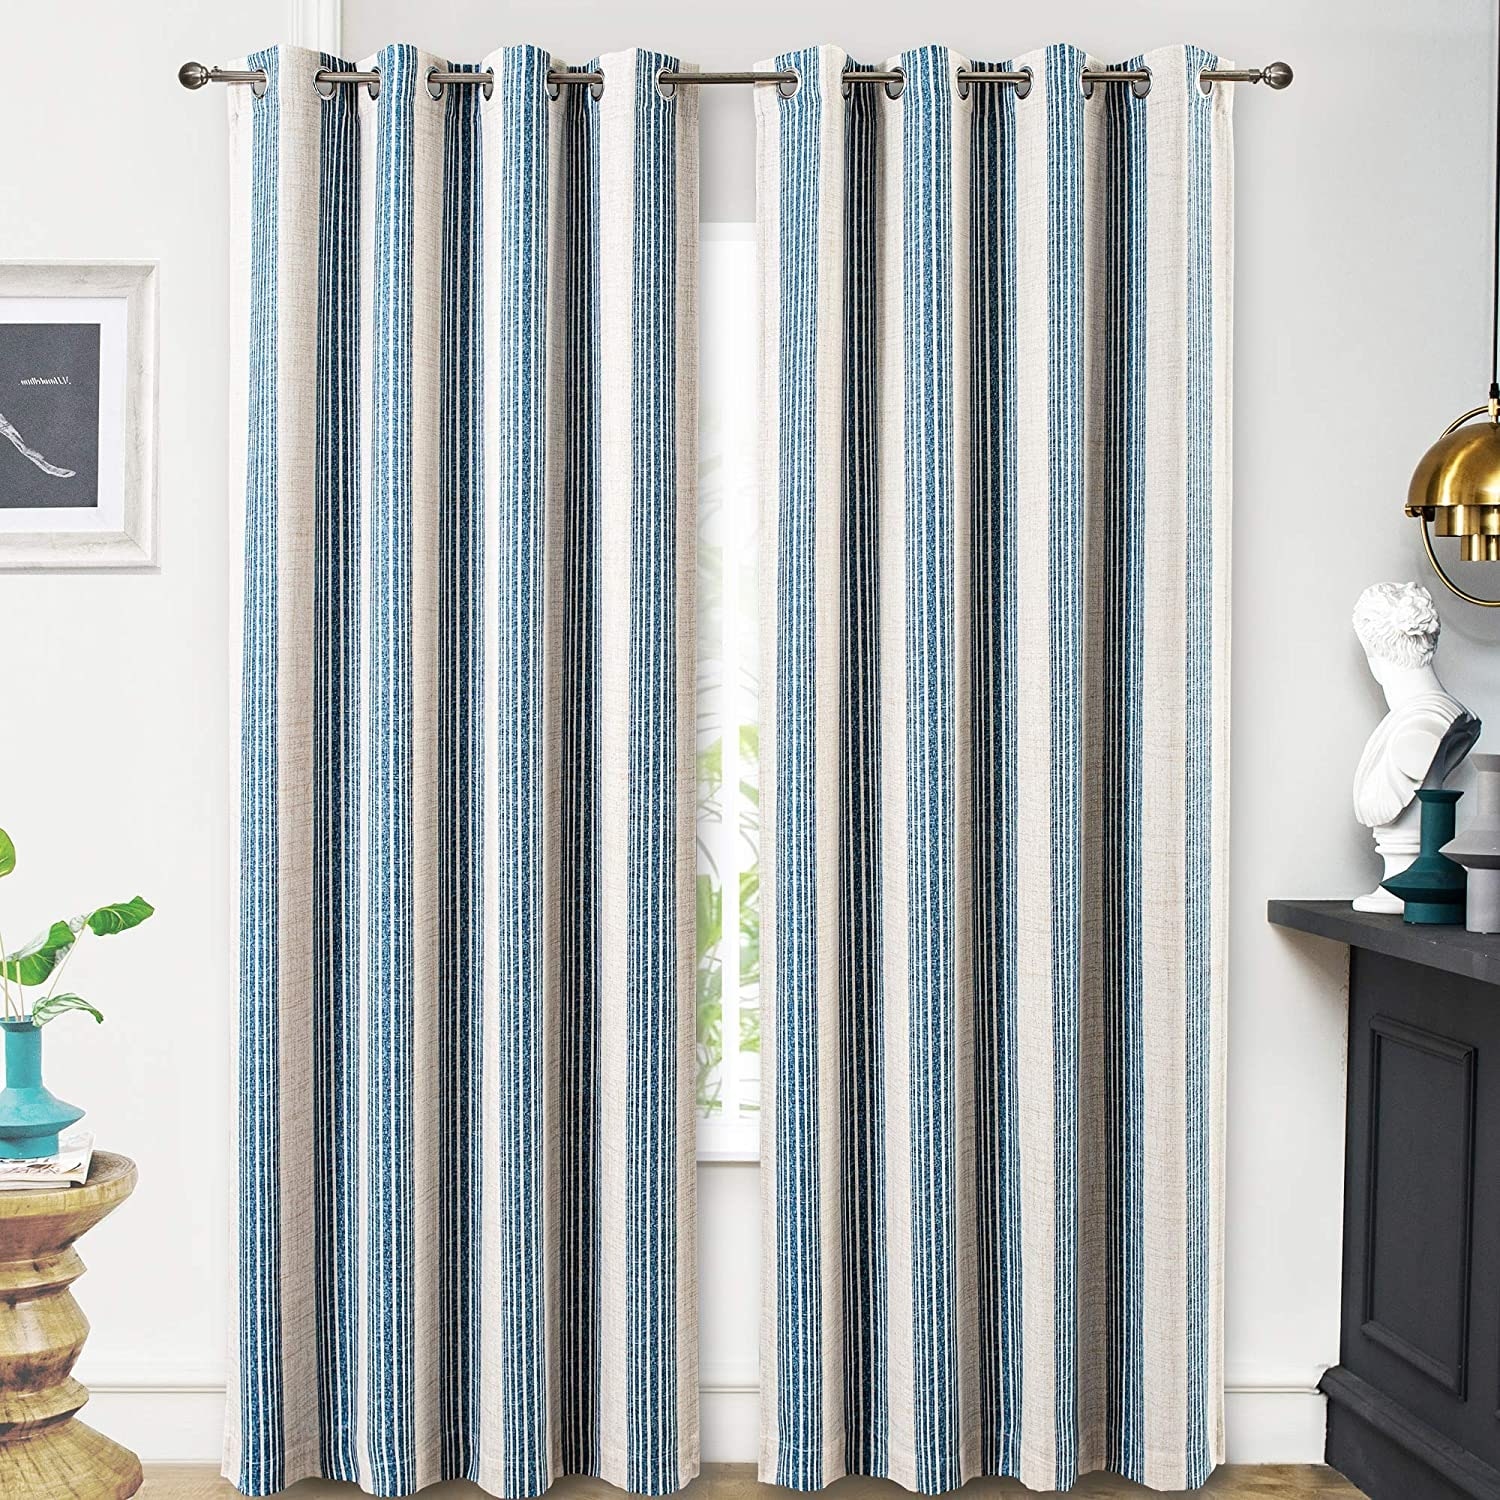 https://ak1.ostkcdn.com/images/products/is/images/direct/cce9f3a3e22f95e8d6dd09bc00975a87bcf3e52e/DriftAway-Chris-Vertical-Striped-Pattern-Linen-Blend-Lined-Blackout-Window-Curtains.jpg